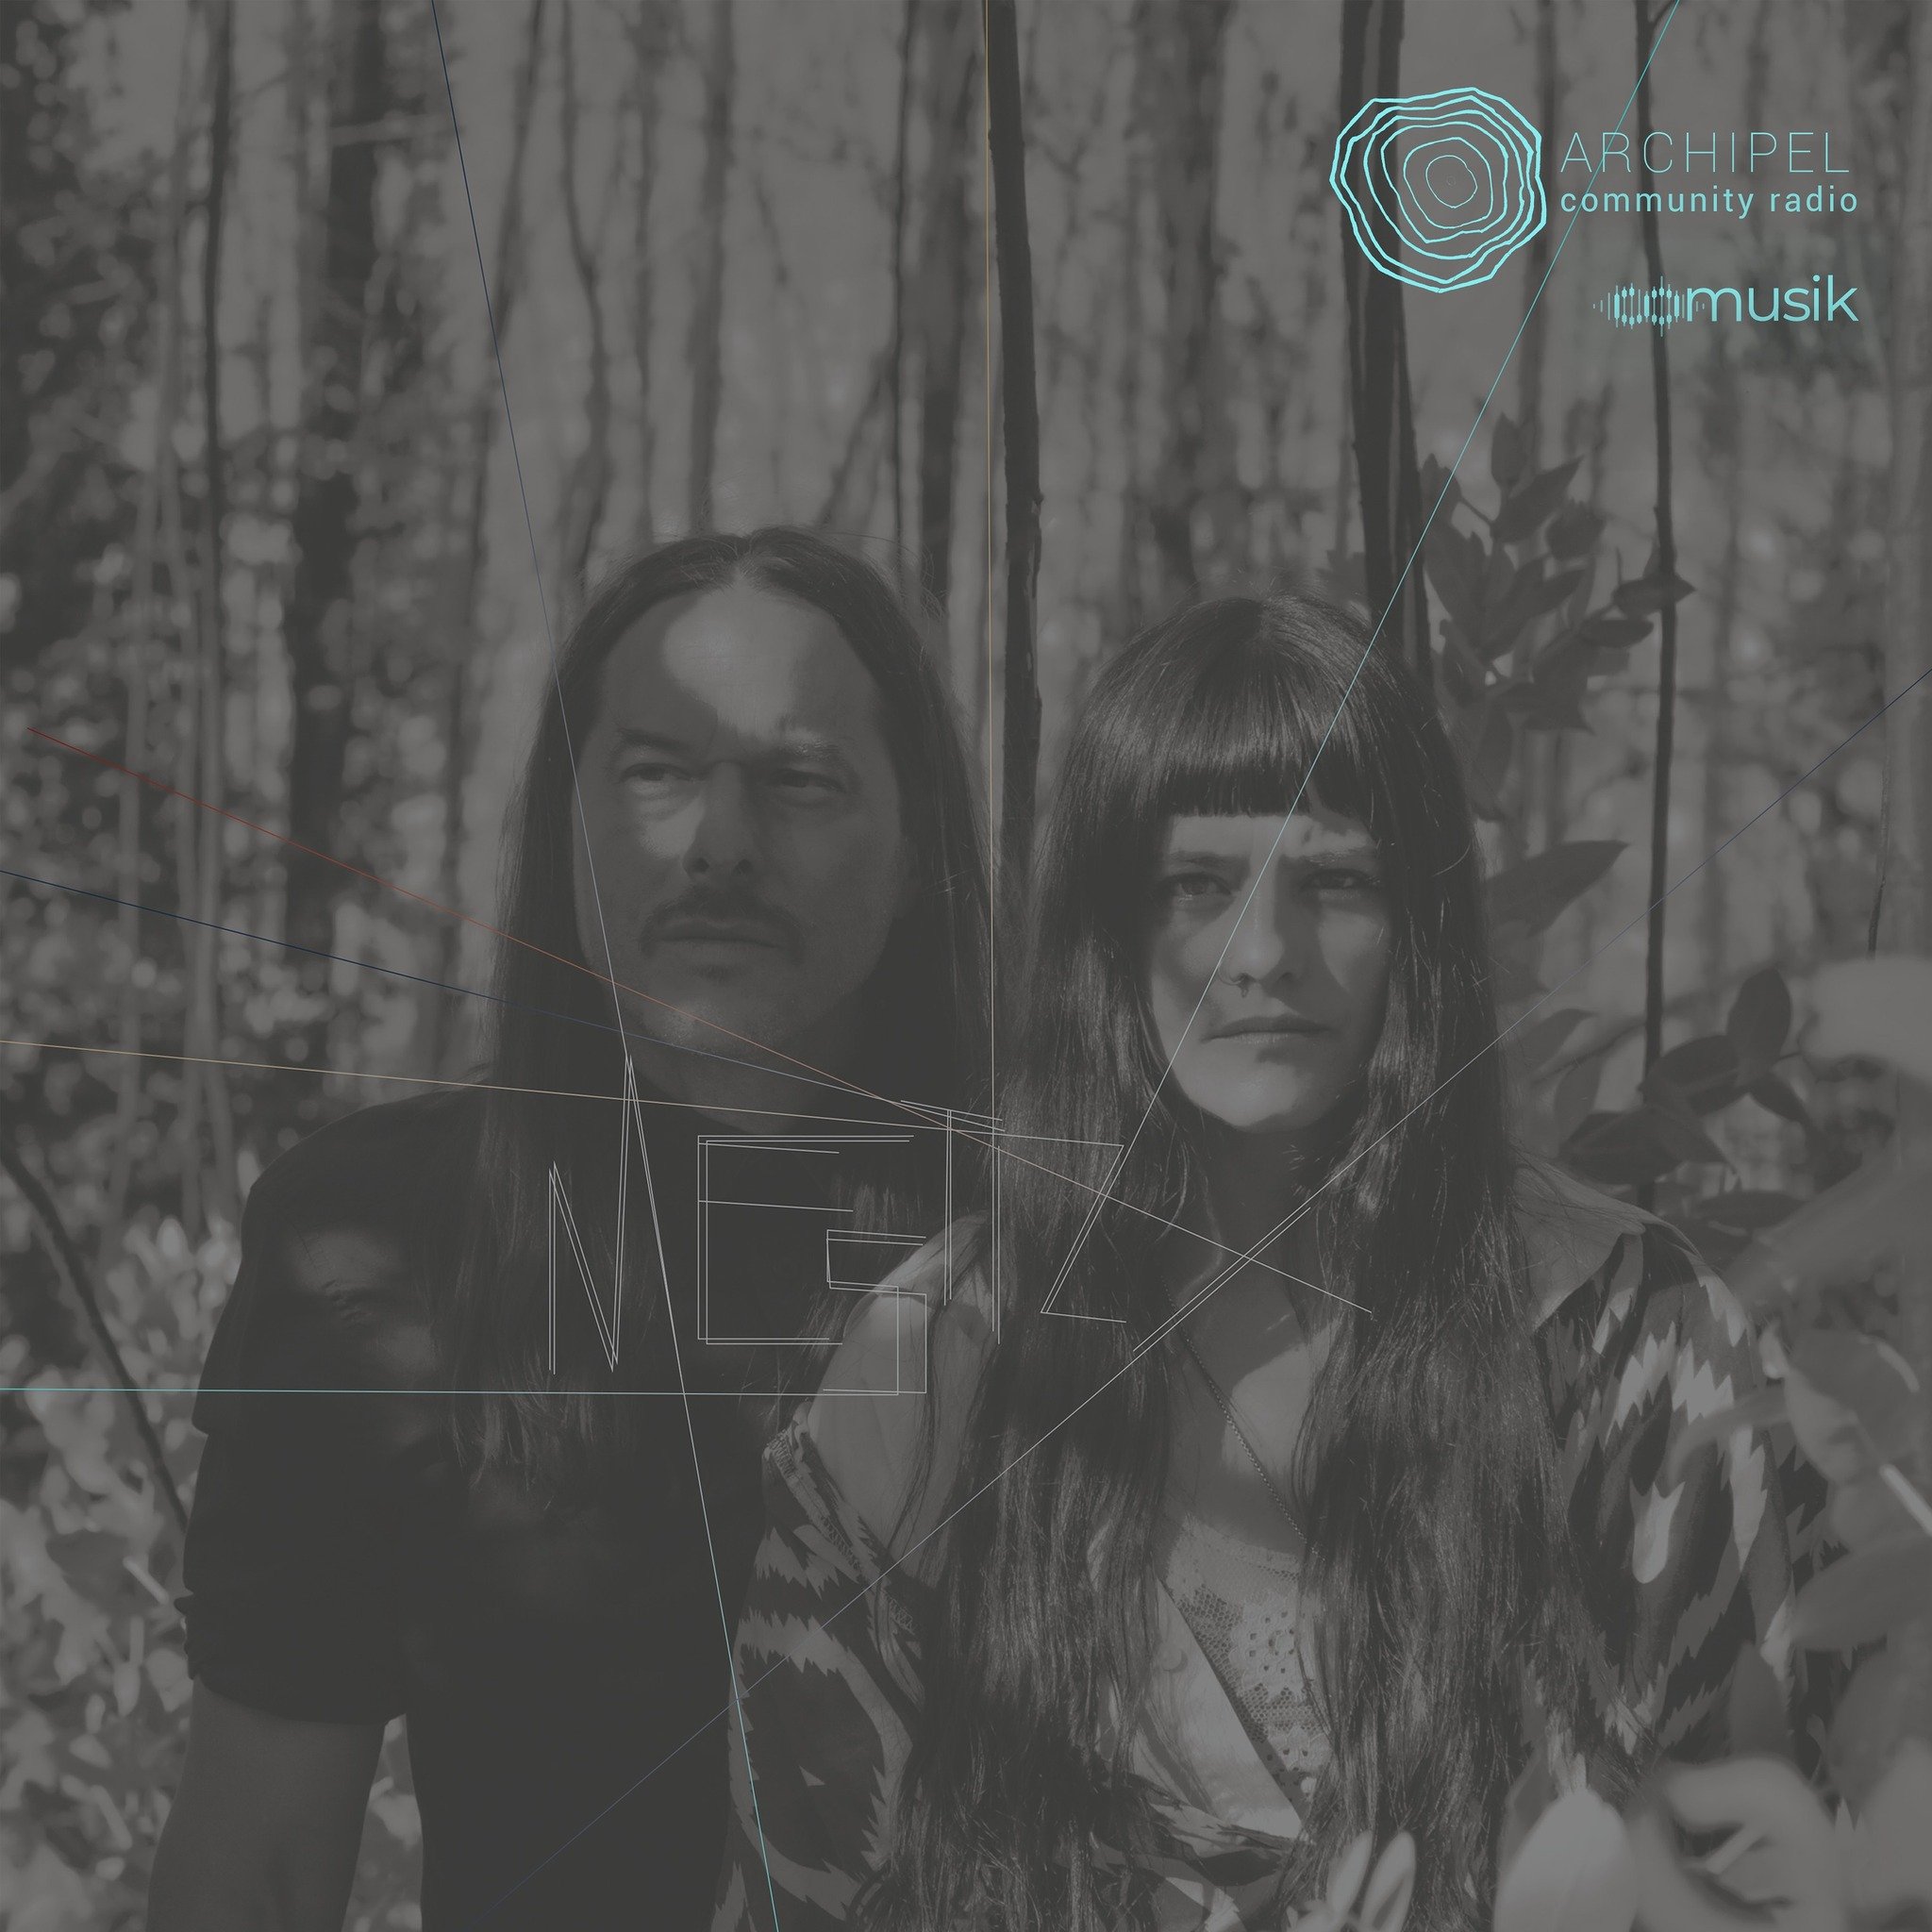 @ibelisseguardiaferragutti &amp; @frank_rosaly will be on the air tomorrow via Berlin&rsquo;s @archipeldotcommunity ! The duo will be sharing music and discussing the making of their forthcoming debut album, 𝘔𝘌𝘚𝘛𝘐𝘡𝘟 - out this Friday, May 3.

